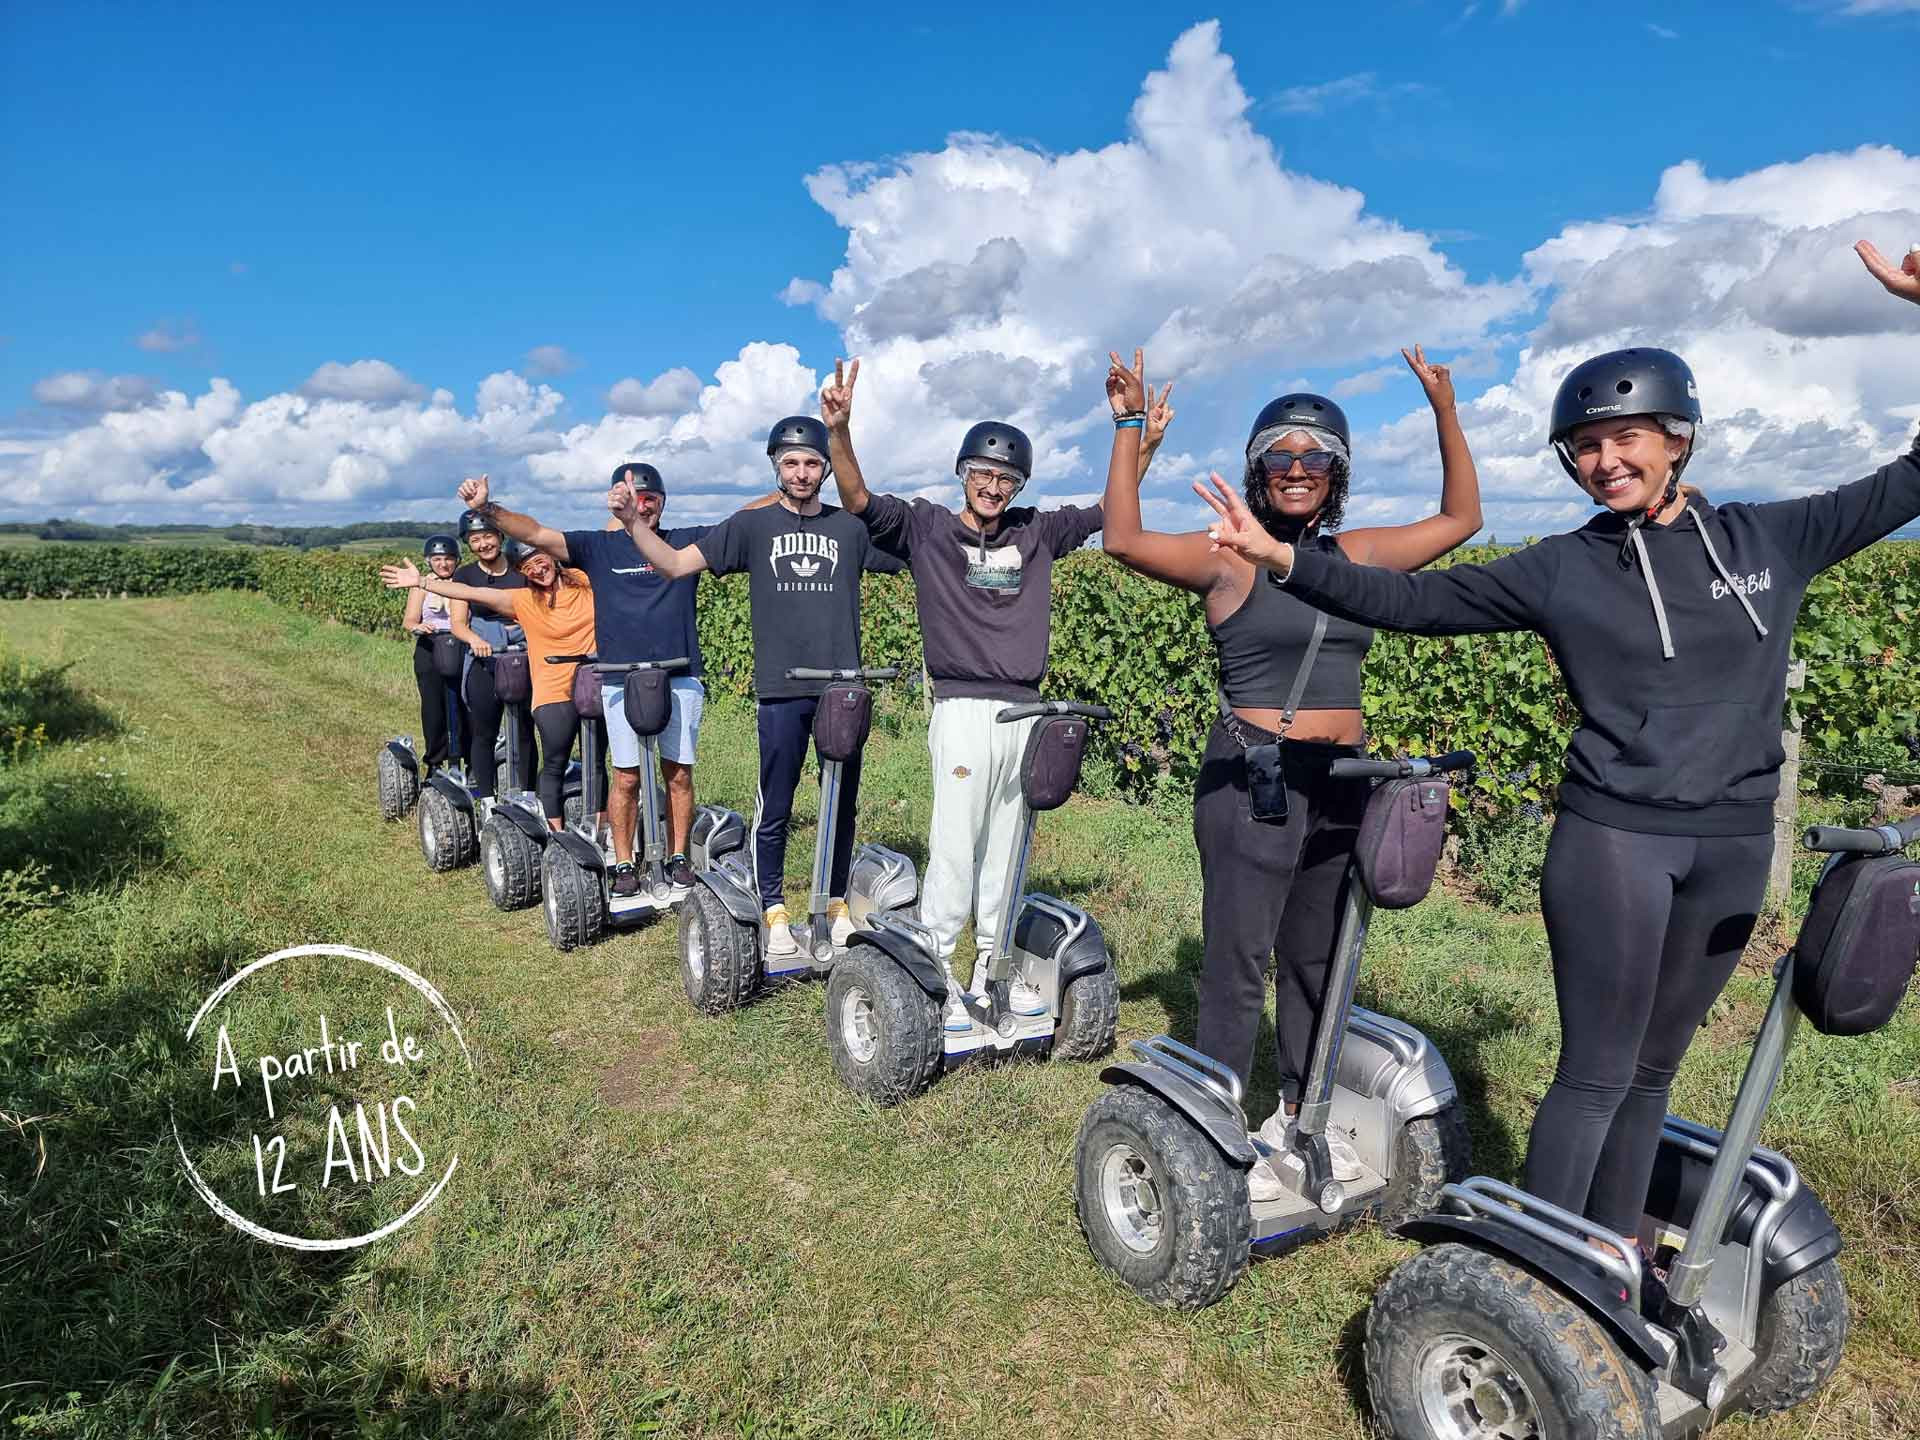 Gyroway - Cross country Segway tours